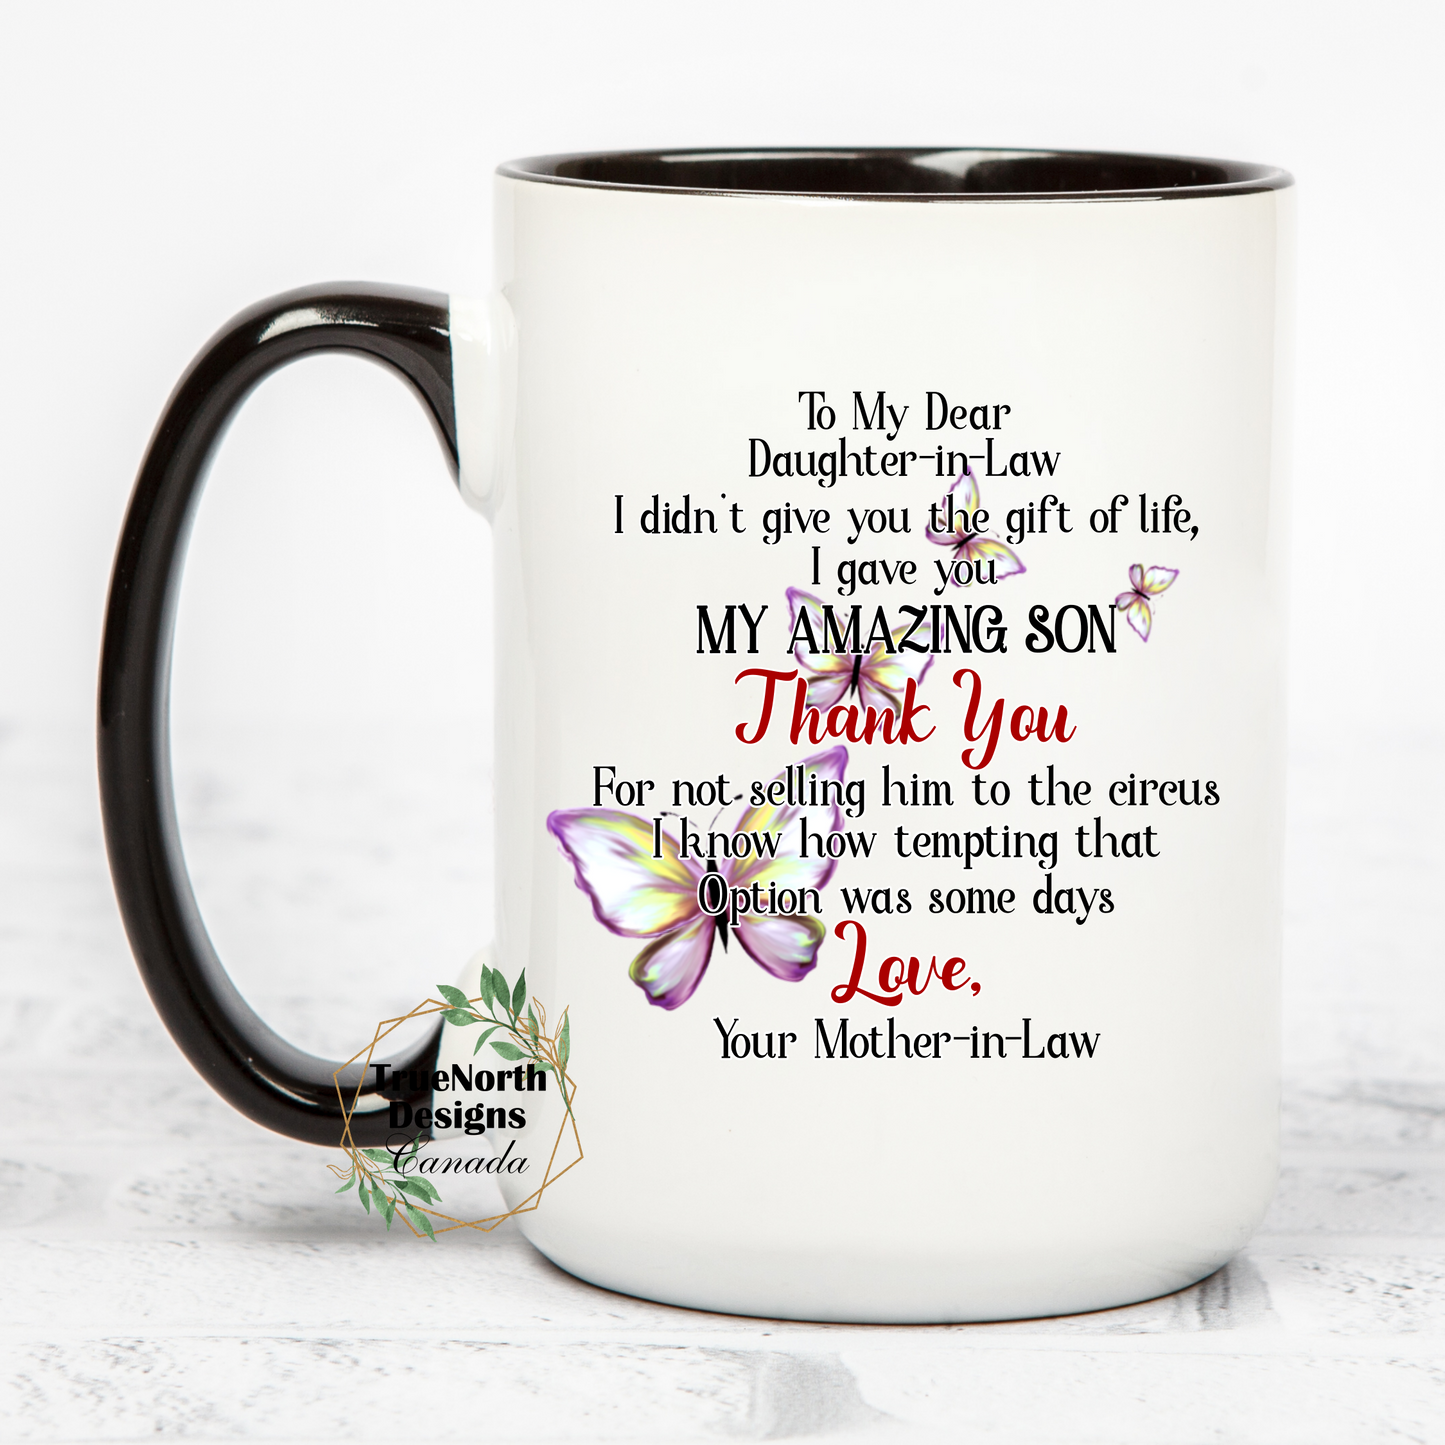 To My Dear Daughter-in-Law Mug